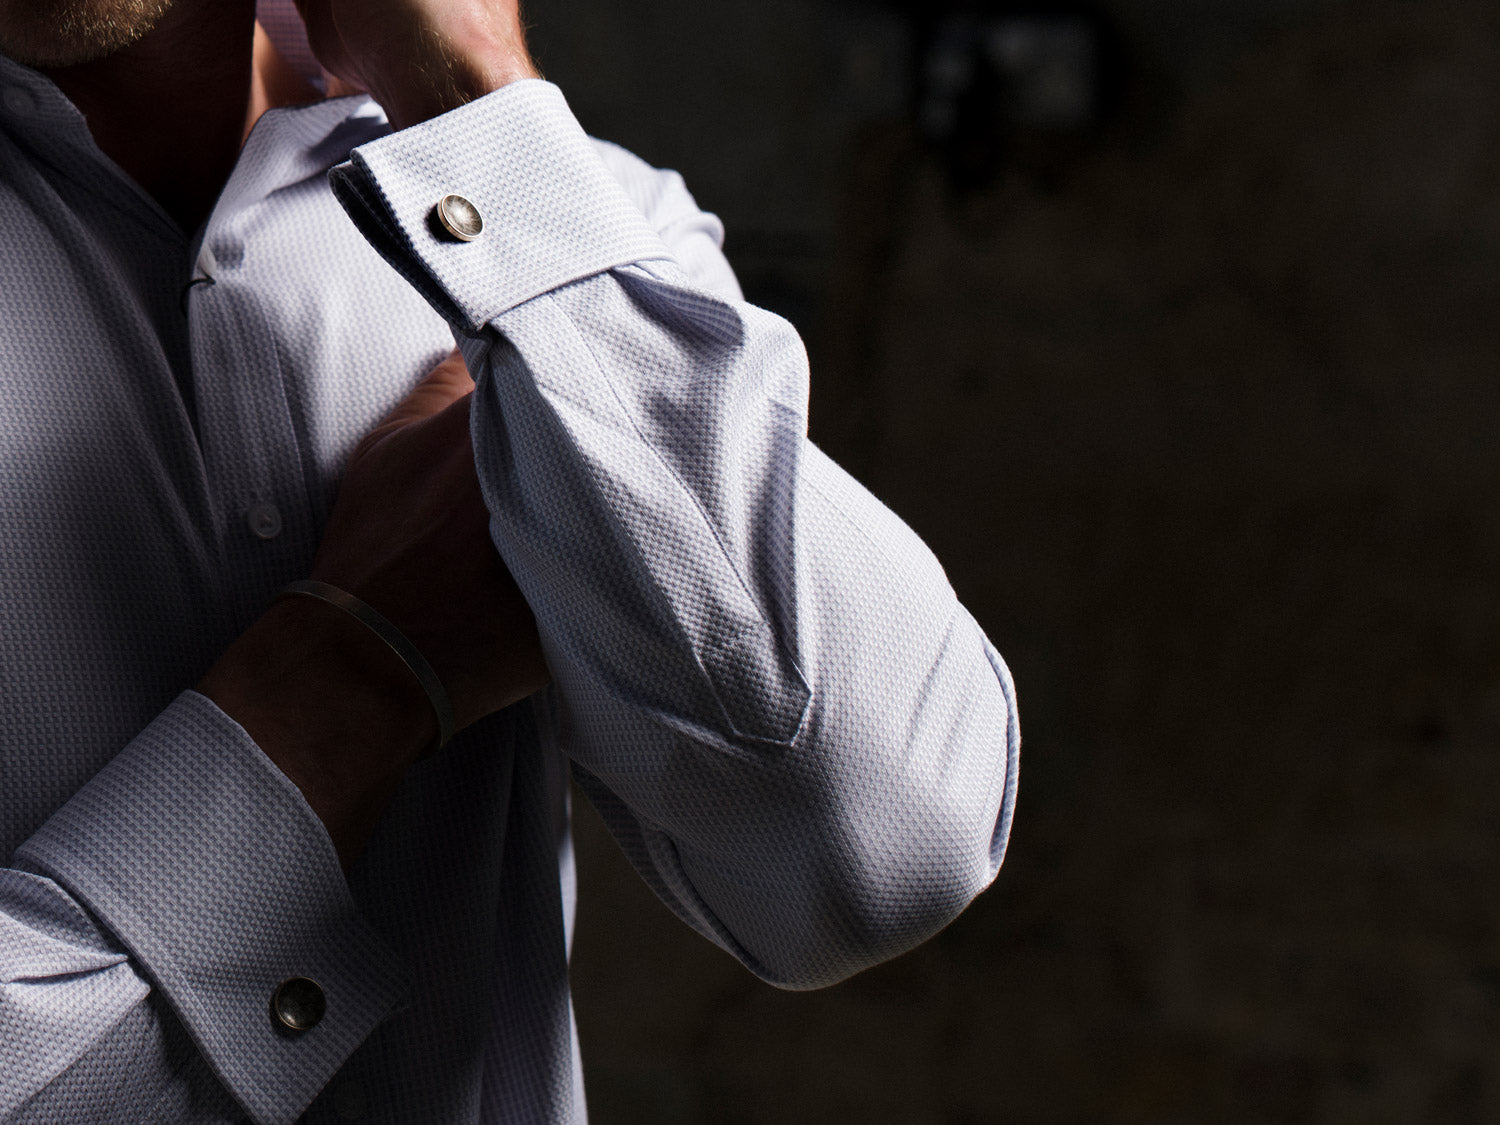 cufflinks with a shirt | Alice Made This